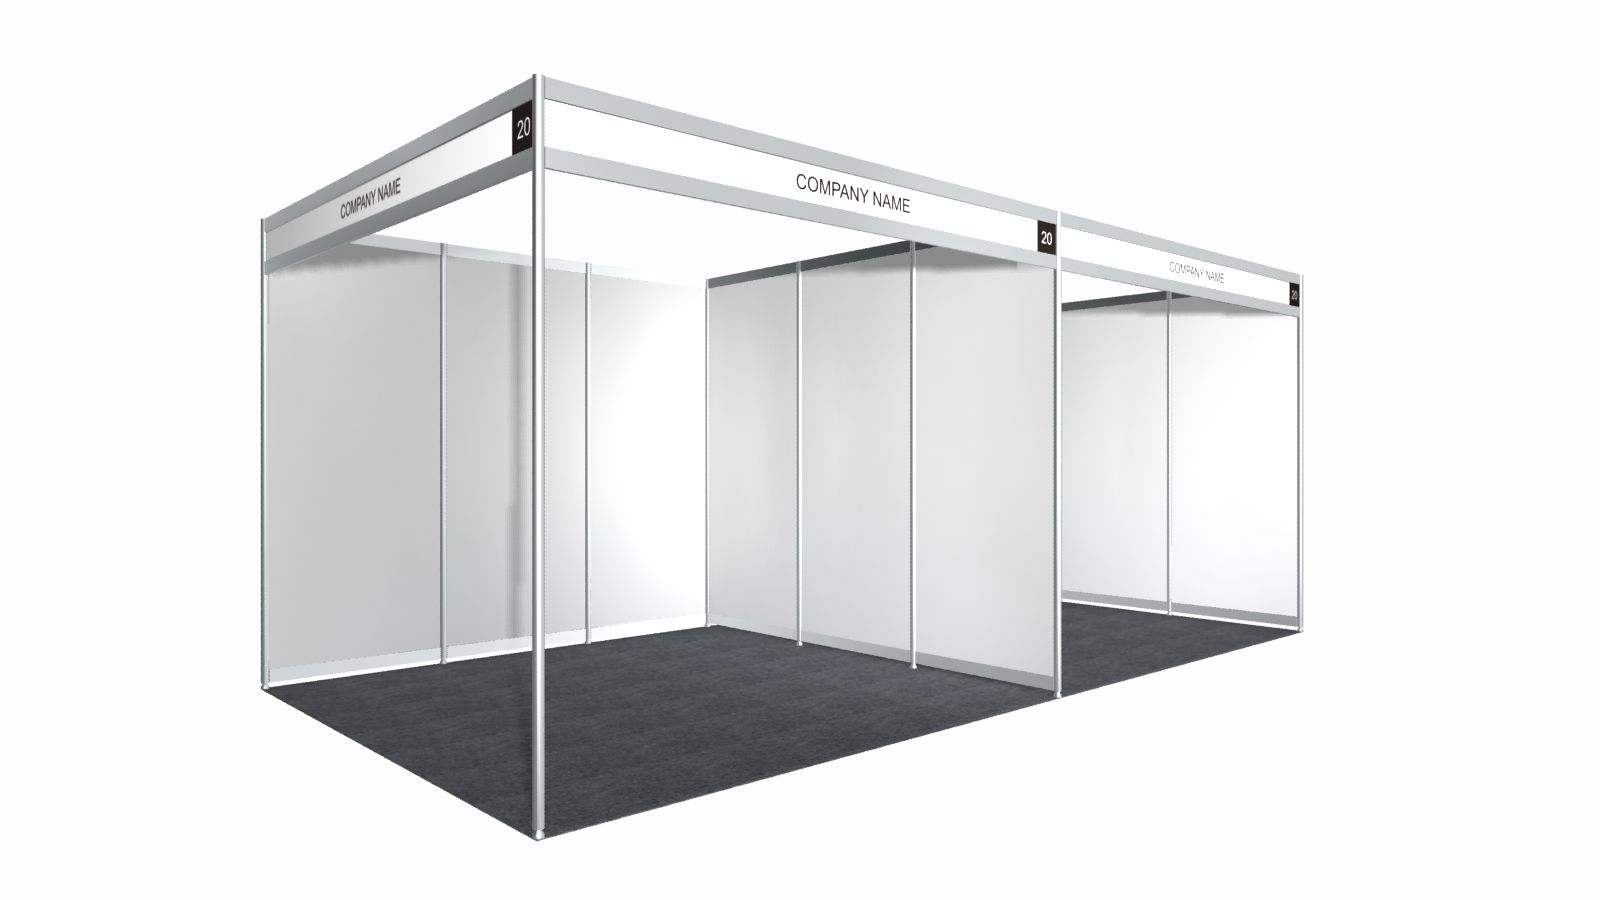 Megahome Shell Scheme Booth